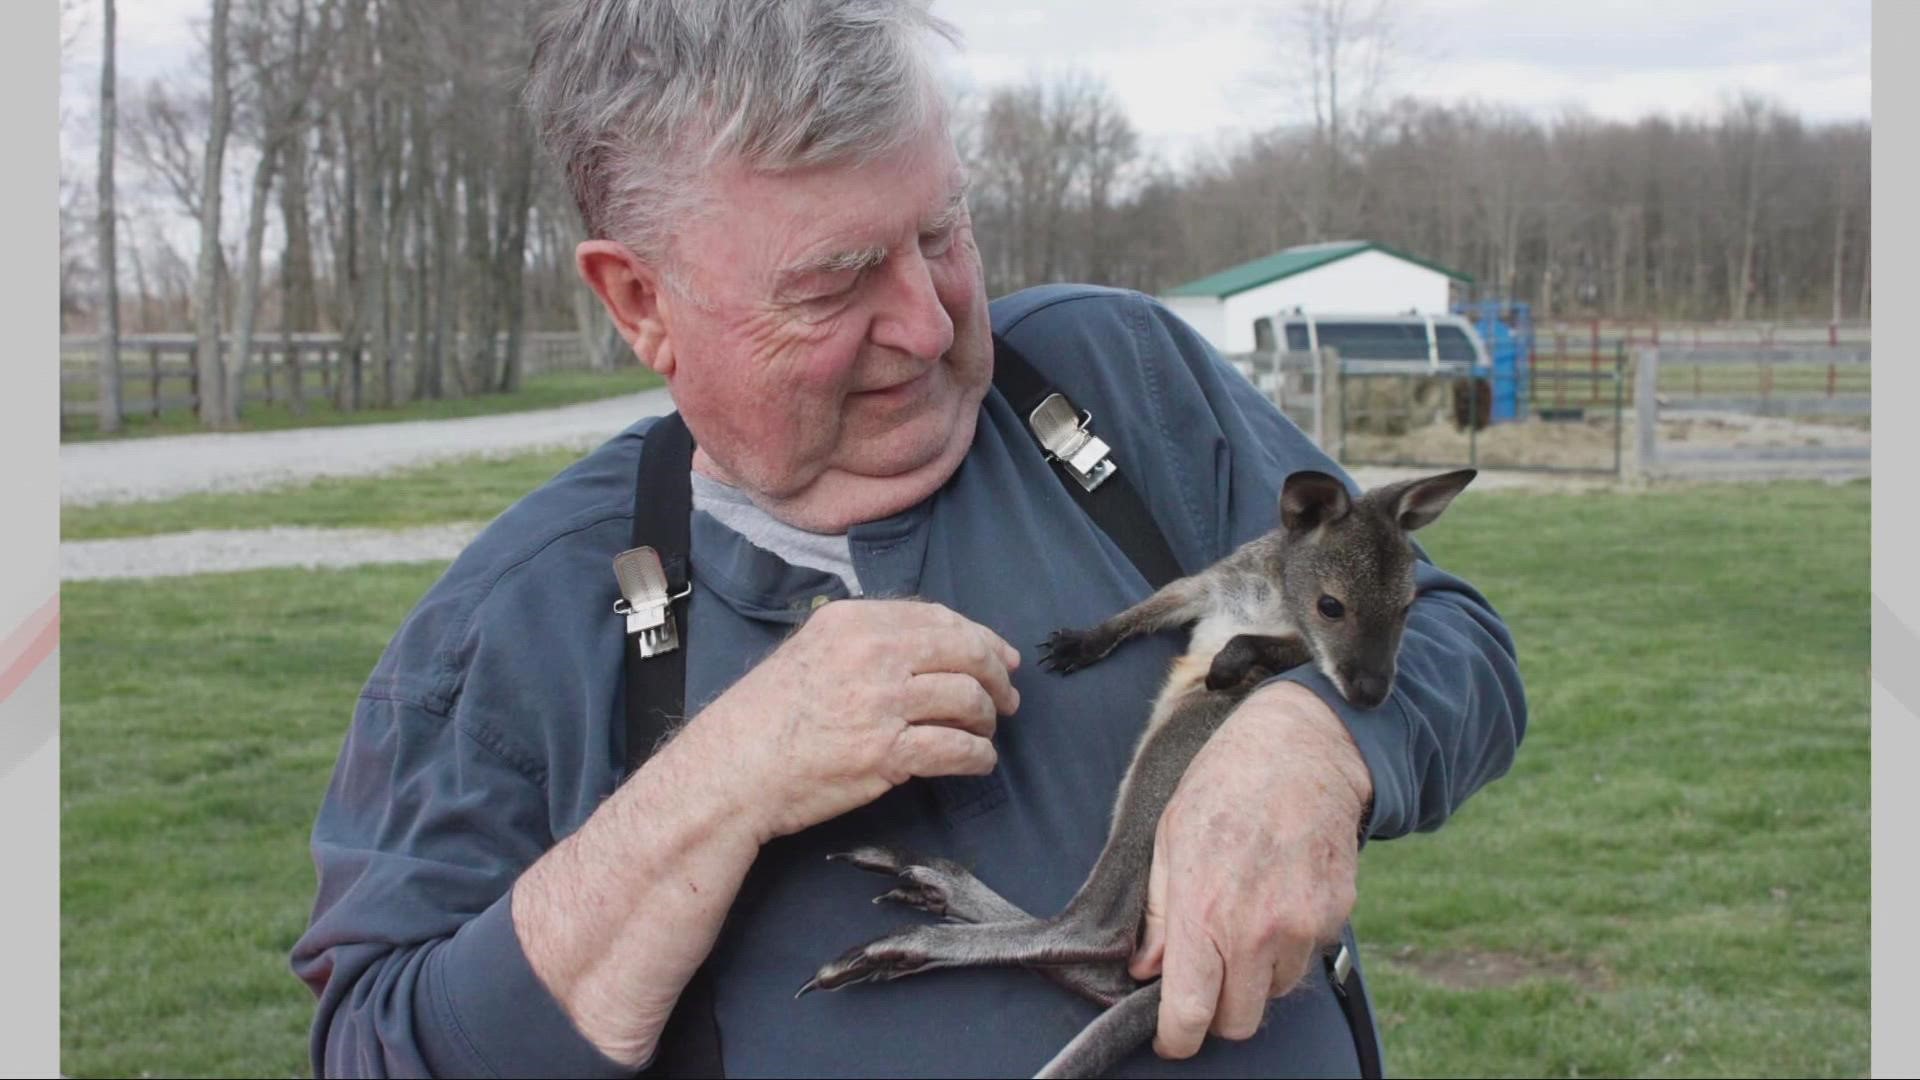 The breeder is worried about the wallaby's health while out in the wild